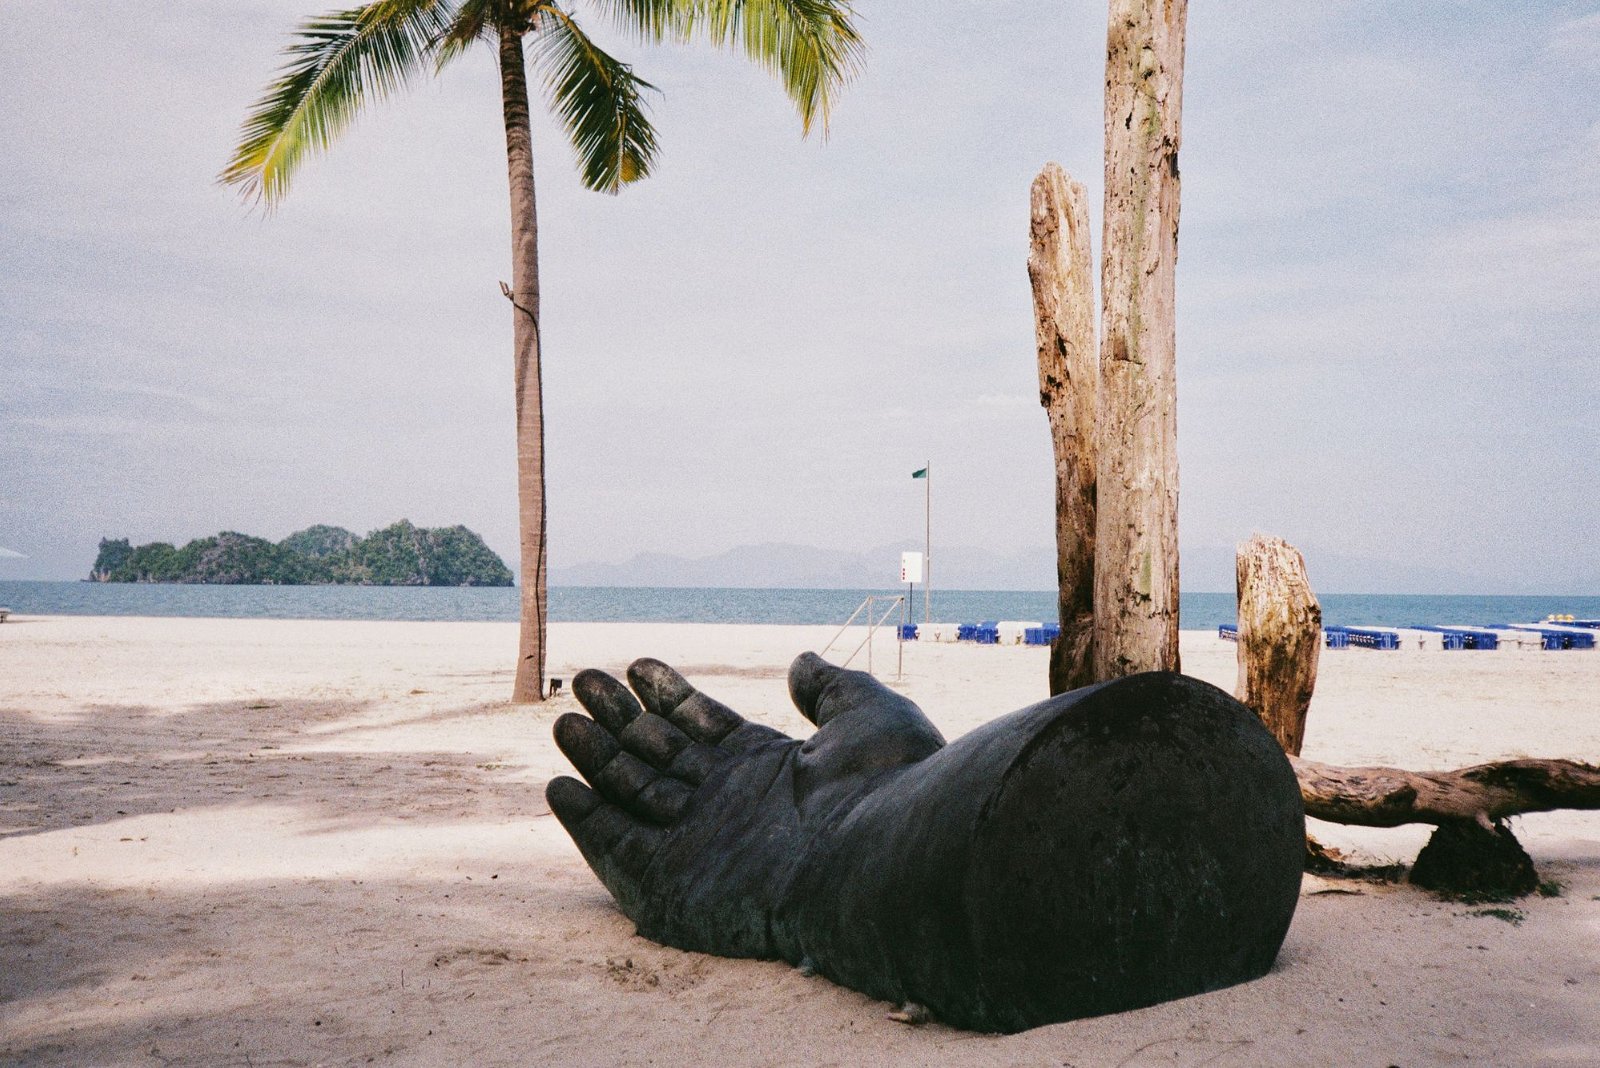 “Do you need a hand?” // Langkawi 2021 // Taken with Konica C35 on Fuji Superia 200 film